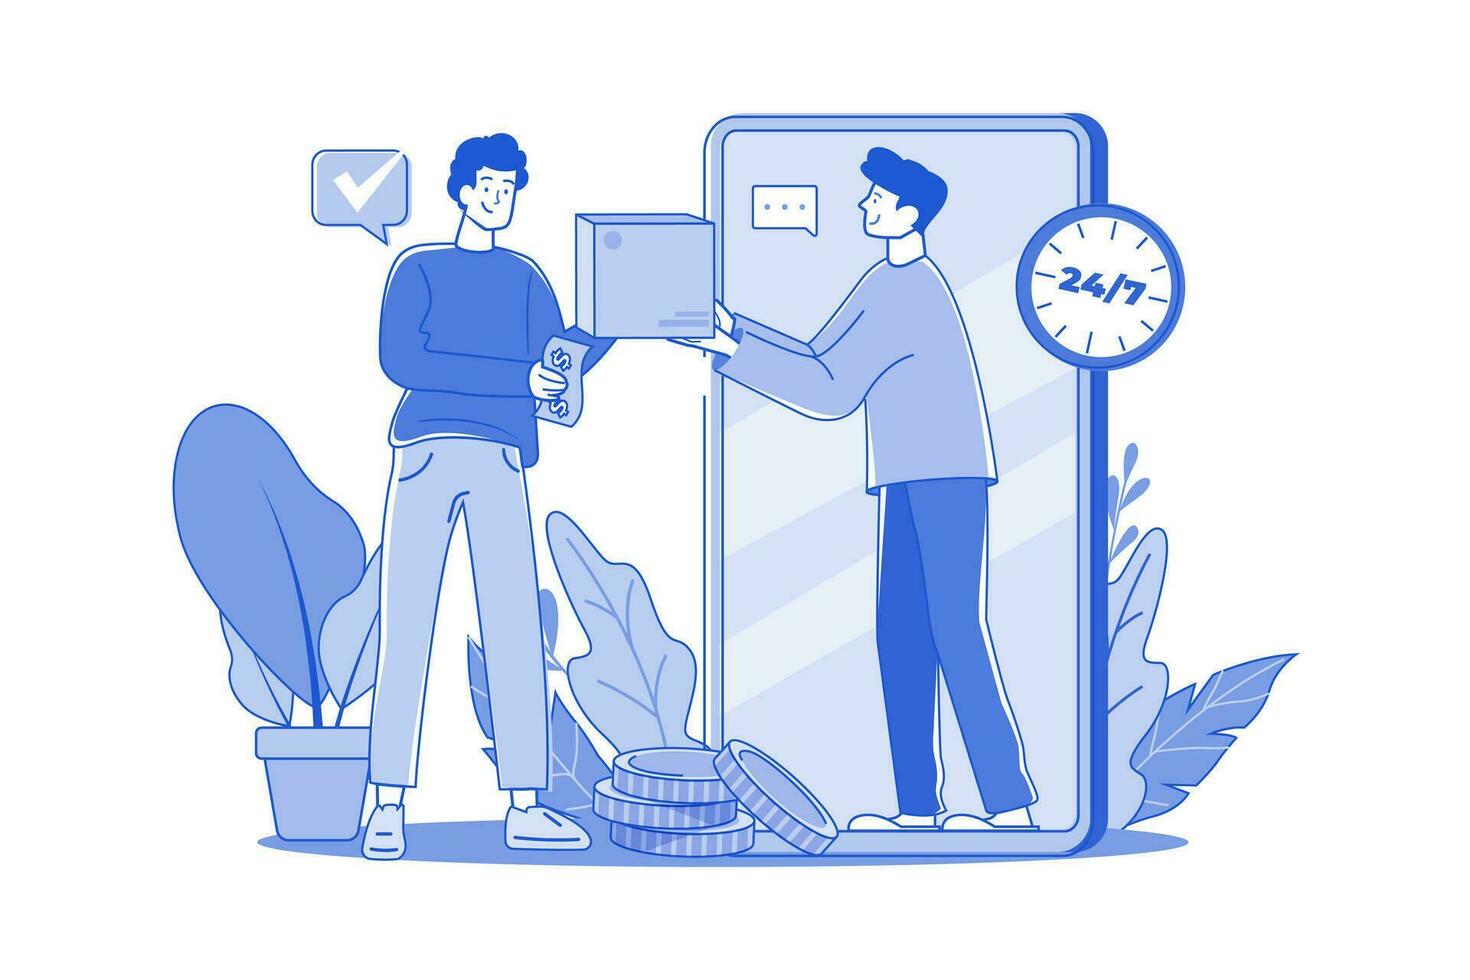 The Man Receives The Goods From The Delivery Man Through The Phone Screen vector